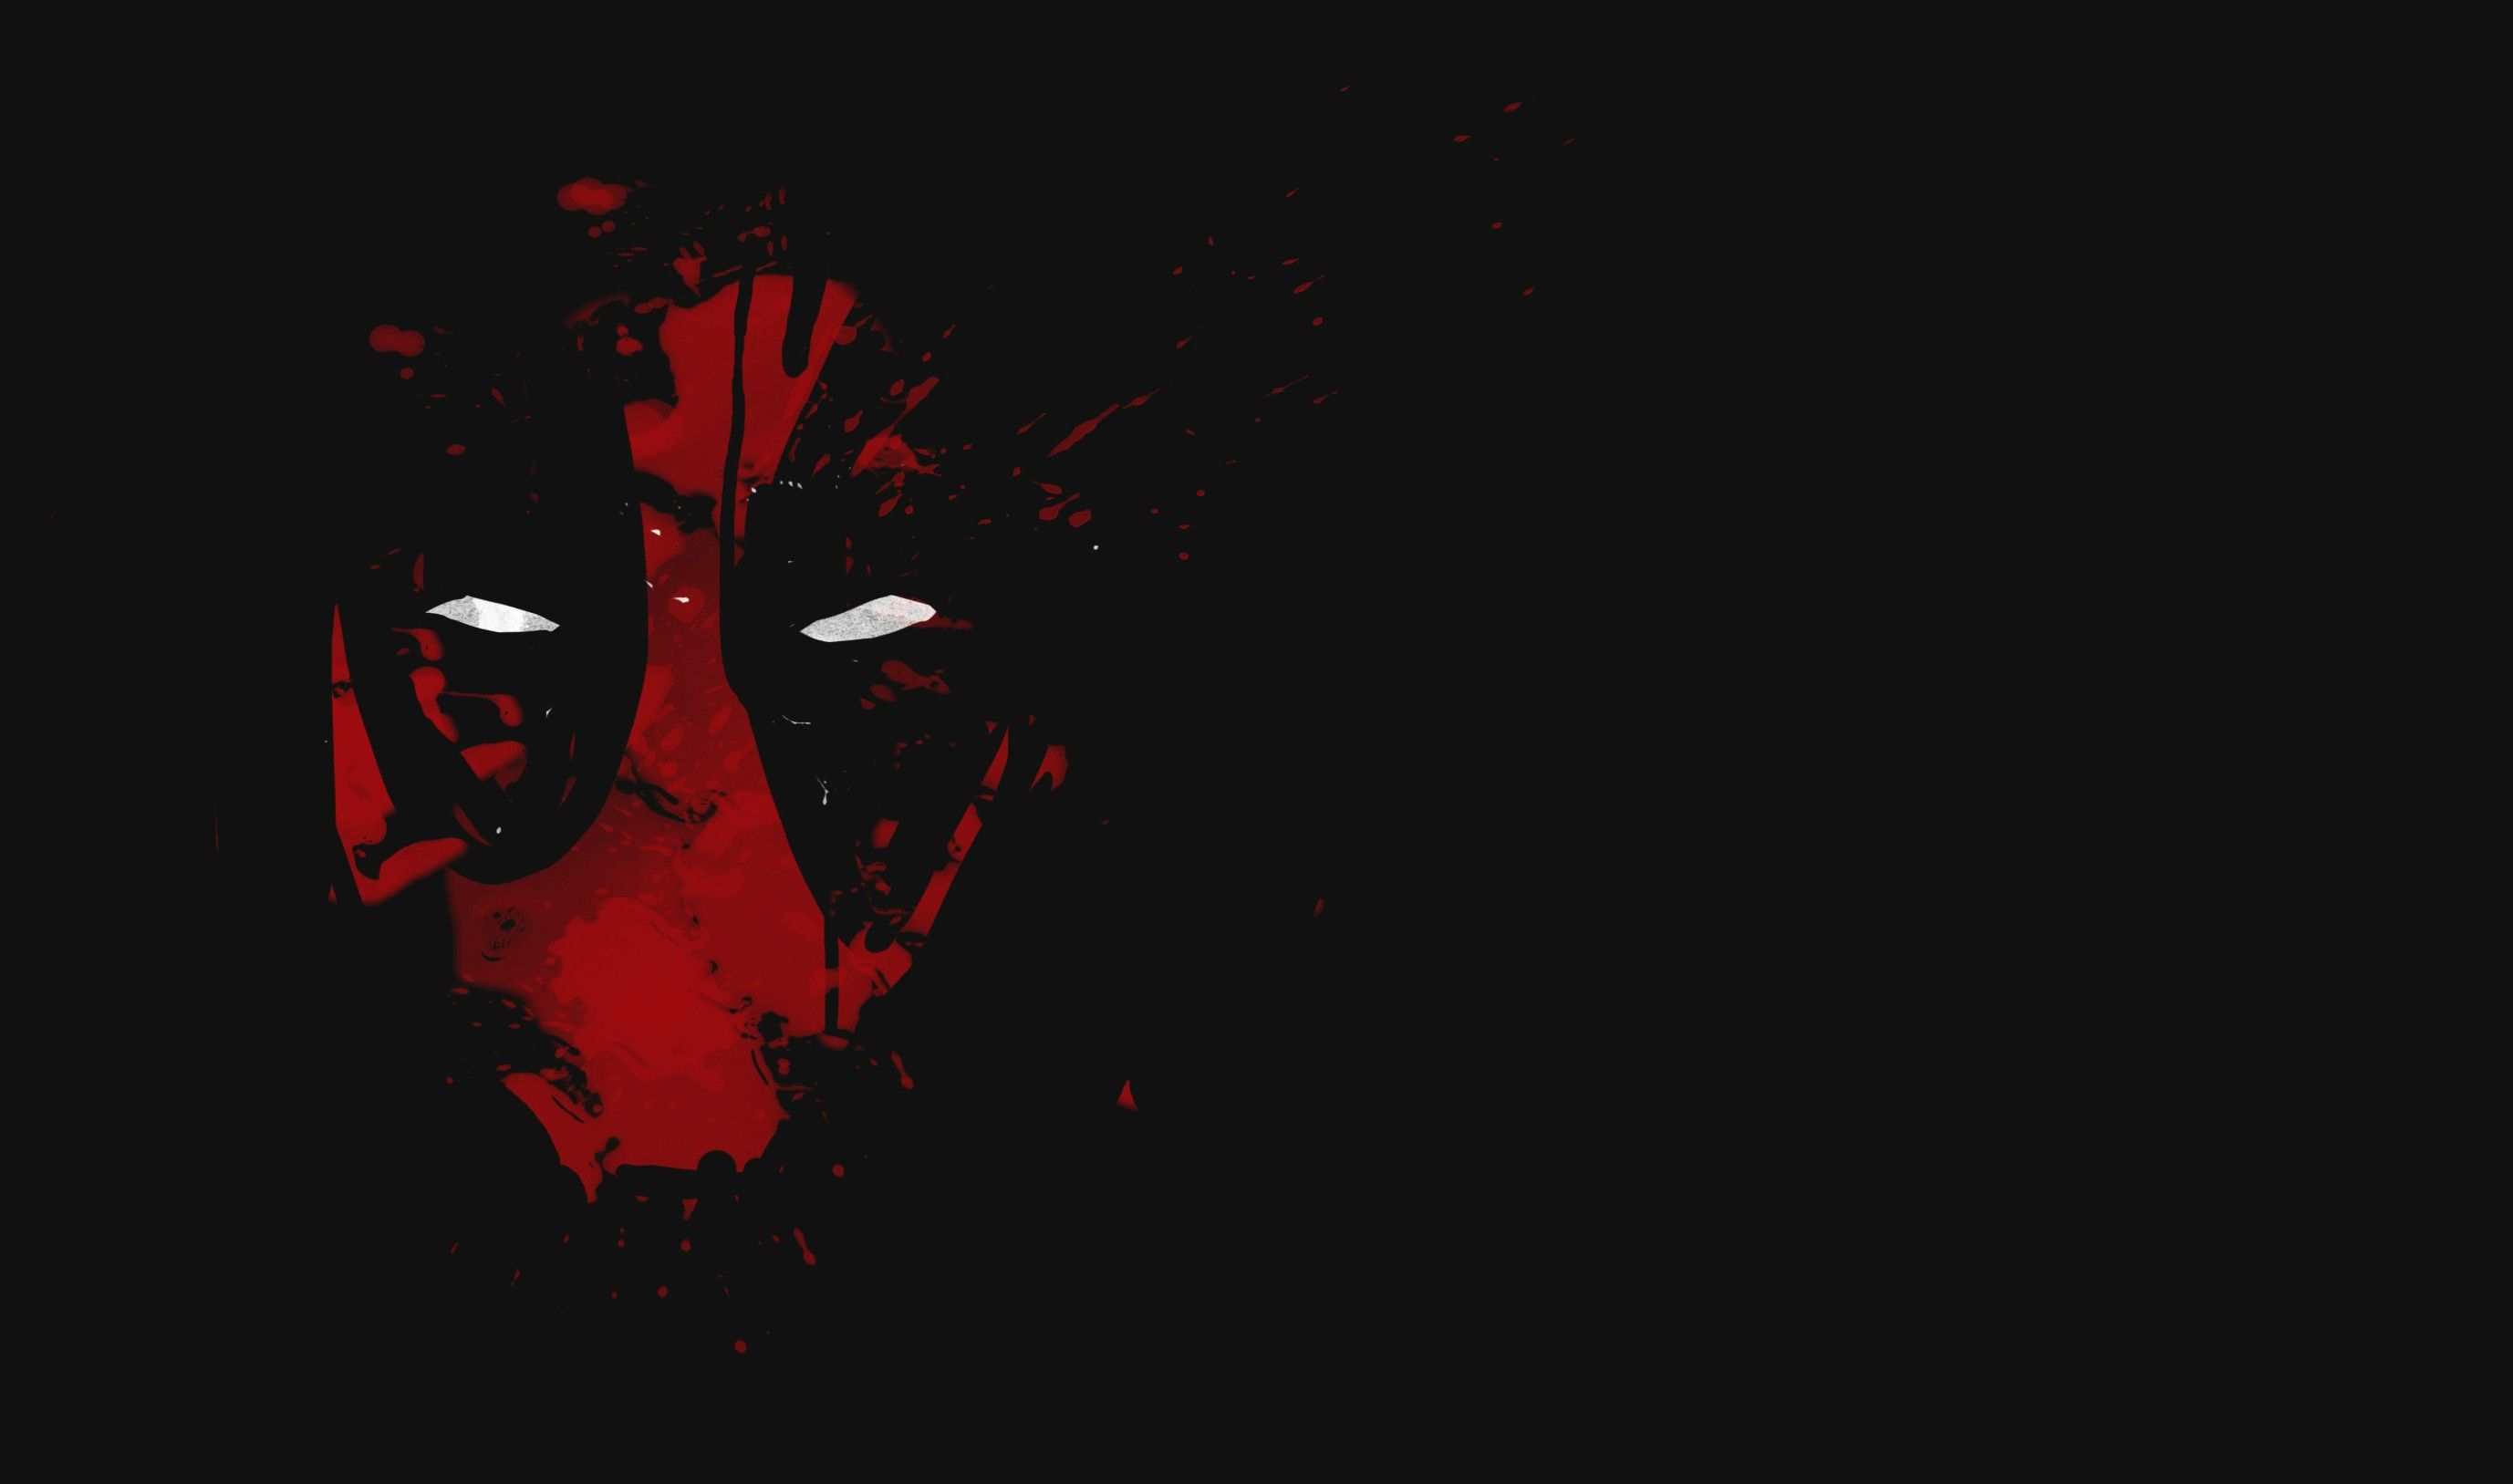 Cool Deadpool Wallpaper with Red Abstract Mask with White Eyes in Dark Background (27 Pics) Wallpaper. Wallpaper Download. High Resolution Wallpaper. Deadpool wallpaper, Deadpool logo wallpaper, Superhero wallpaper